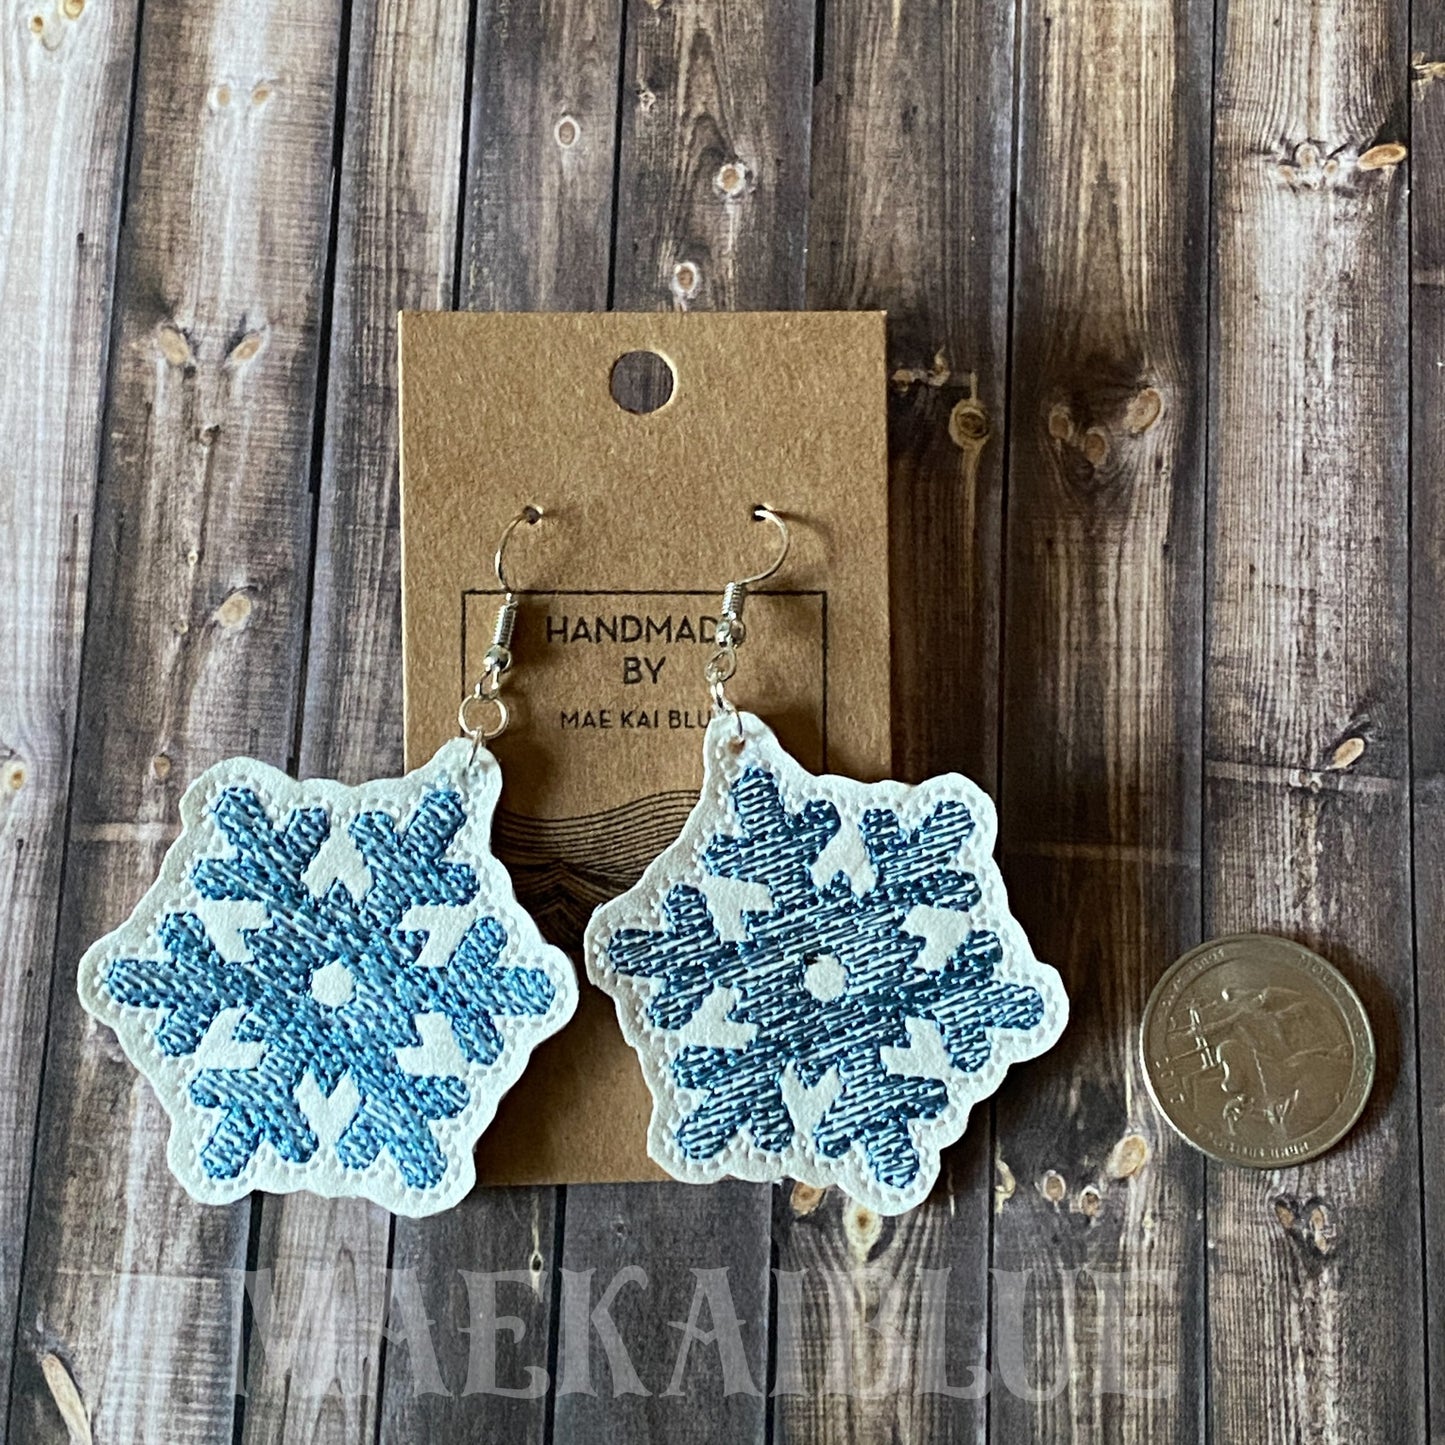 Snowflake Sketch Earrings - 2 sizes - 4x4 and 5x7 Grouped- Digital Embroidery Design